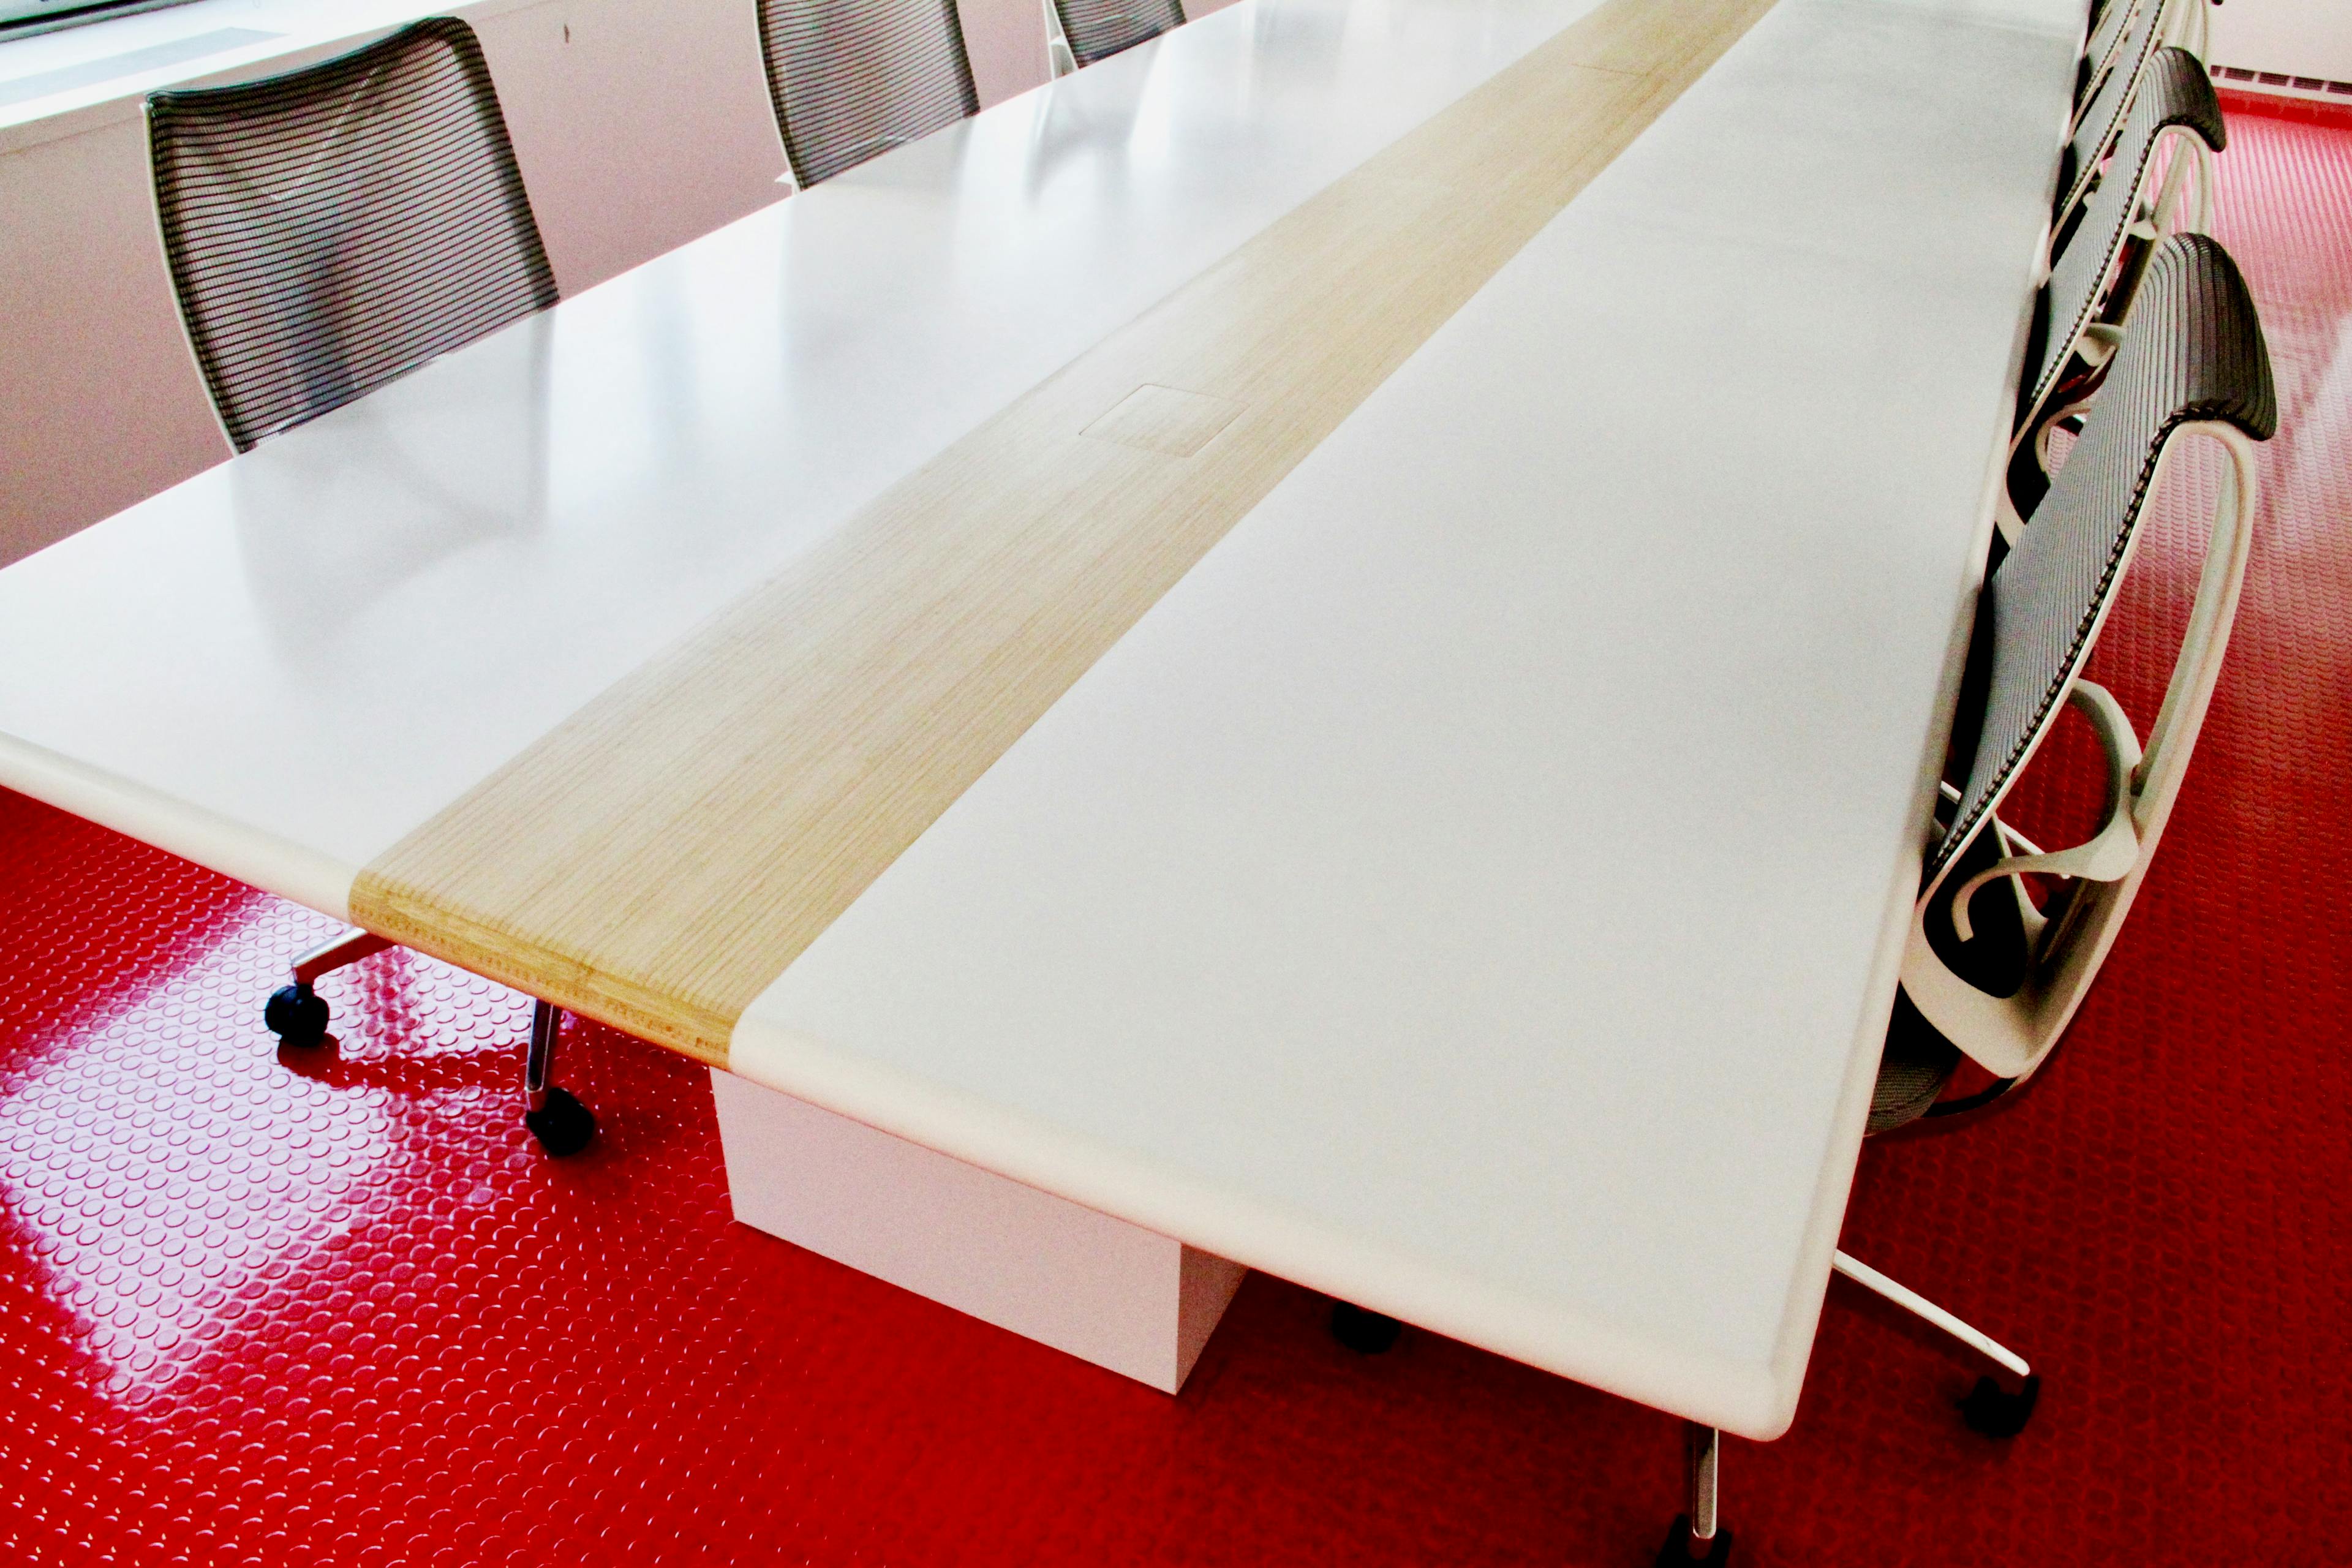 Board room table detail